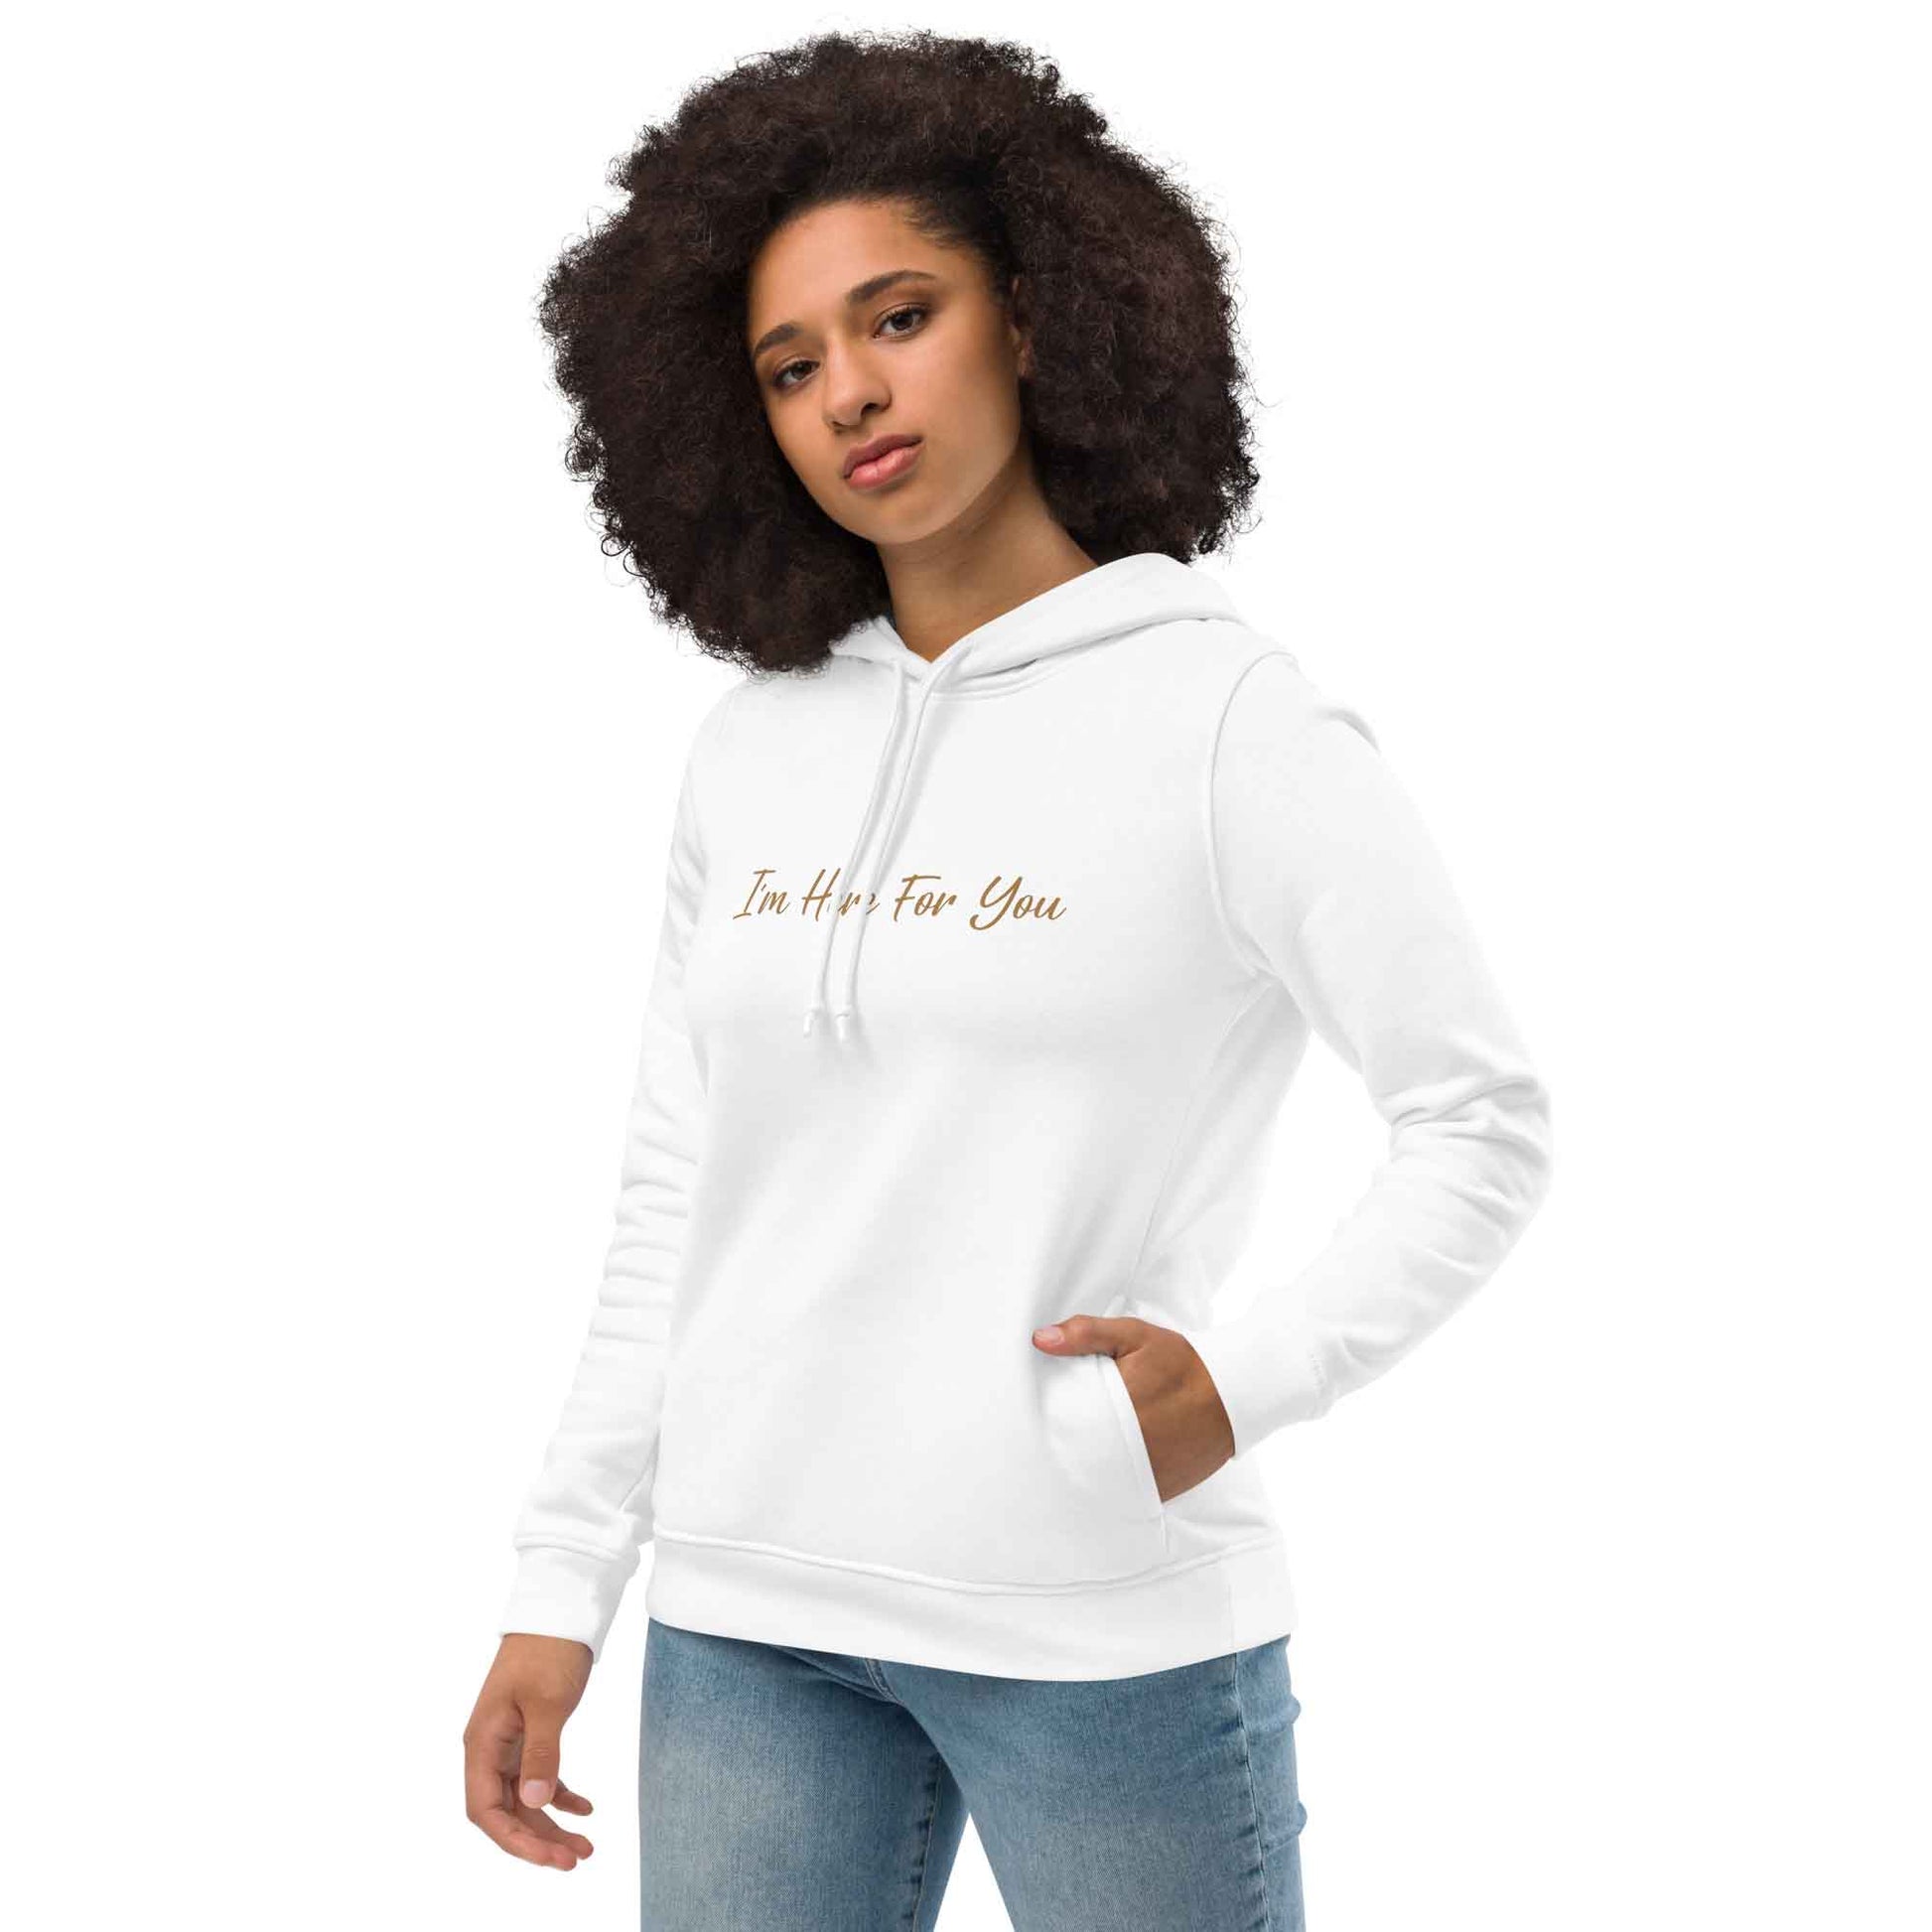 Women white motivational hoodie with inspirational quote, "I'm Here For You."